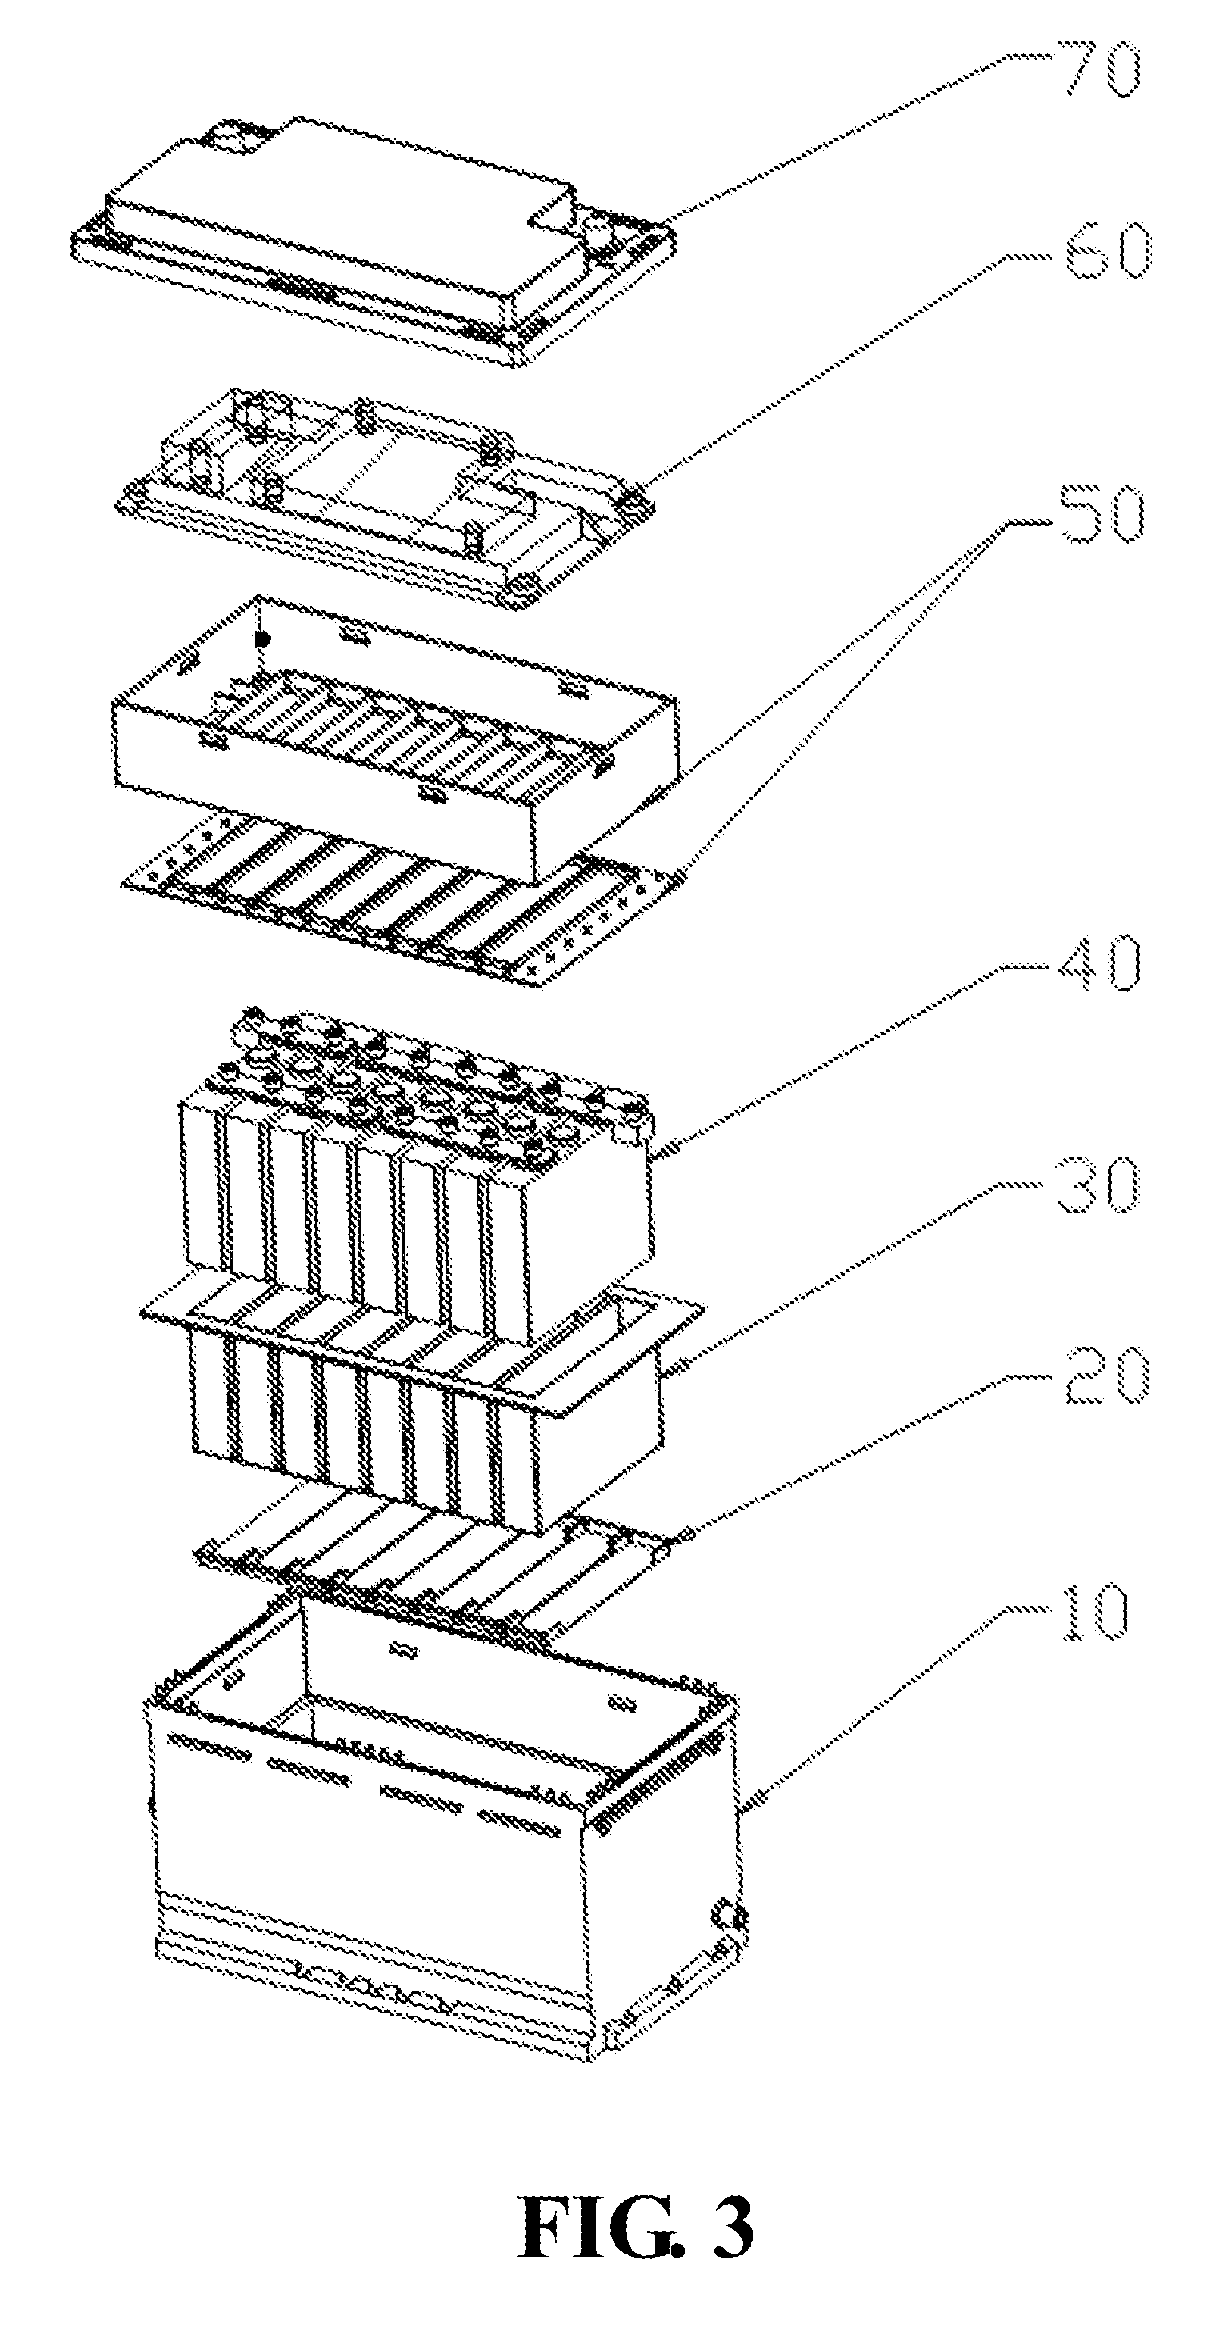 Oil-cooled lithium battery module